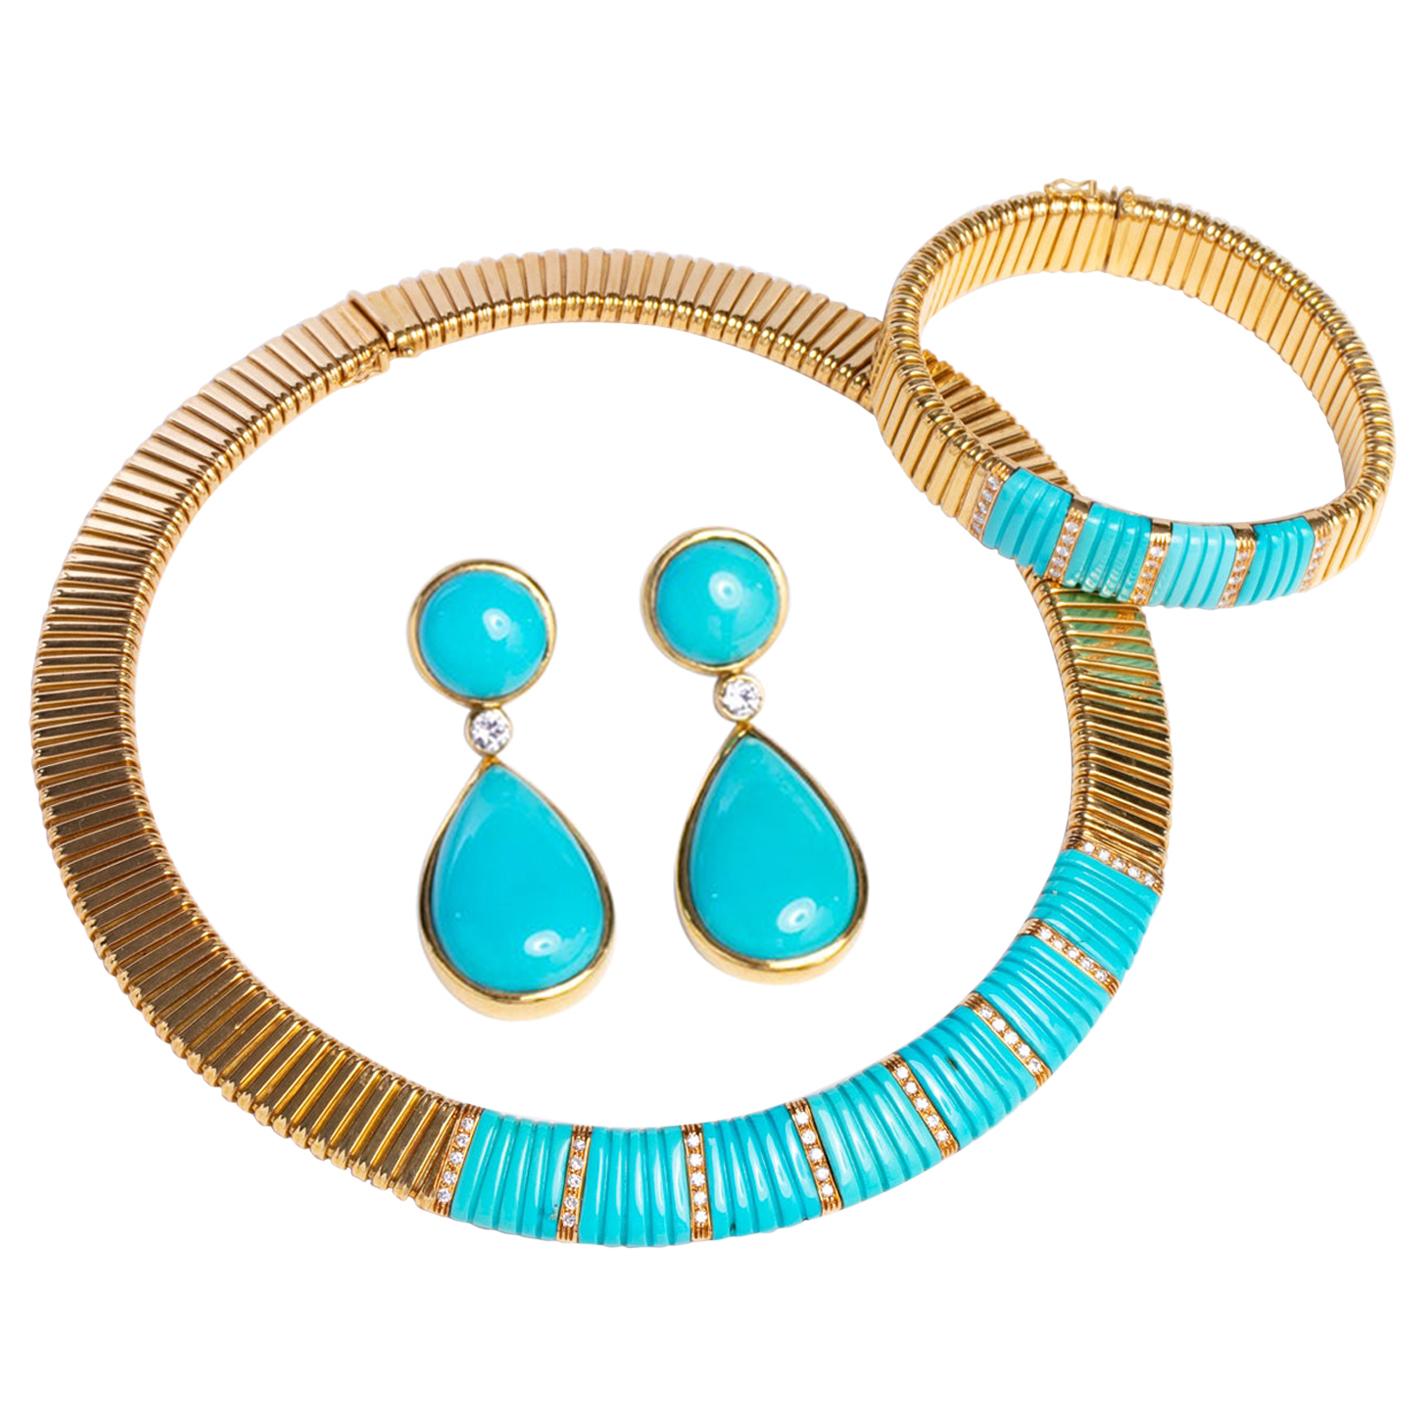 18 Karat Yellow Gold and Turquoise Necklace, Bracelet and Earrings